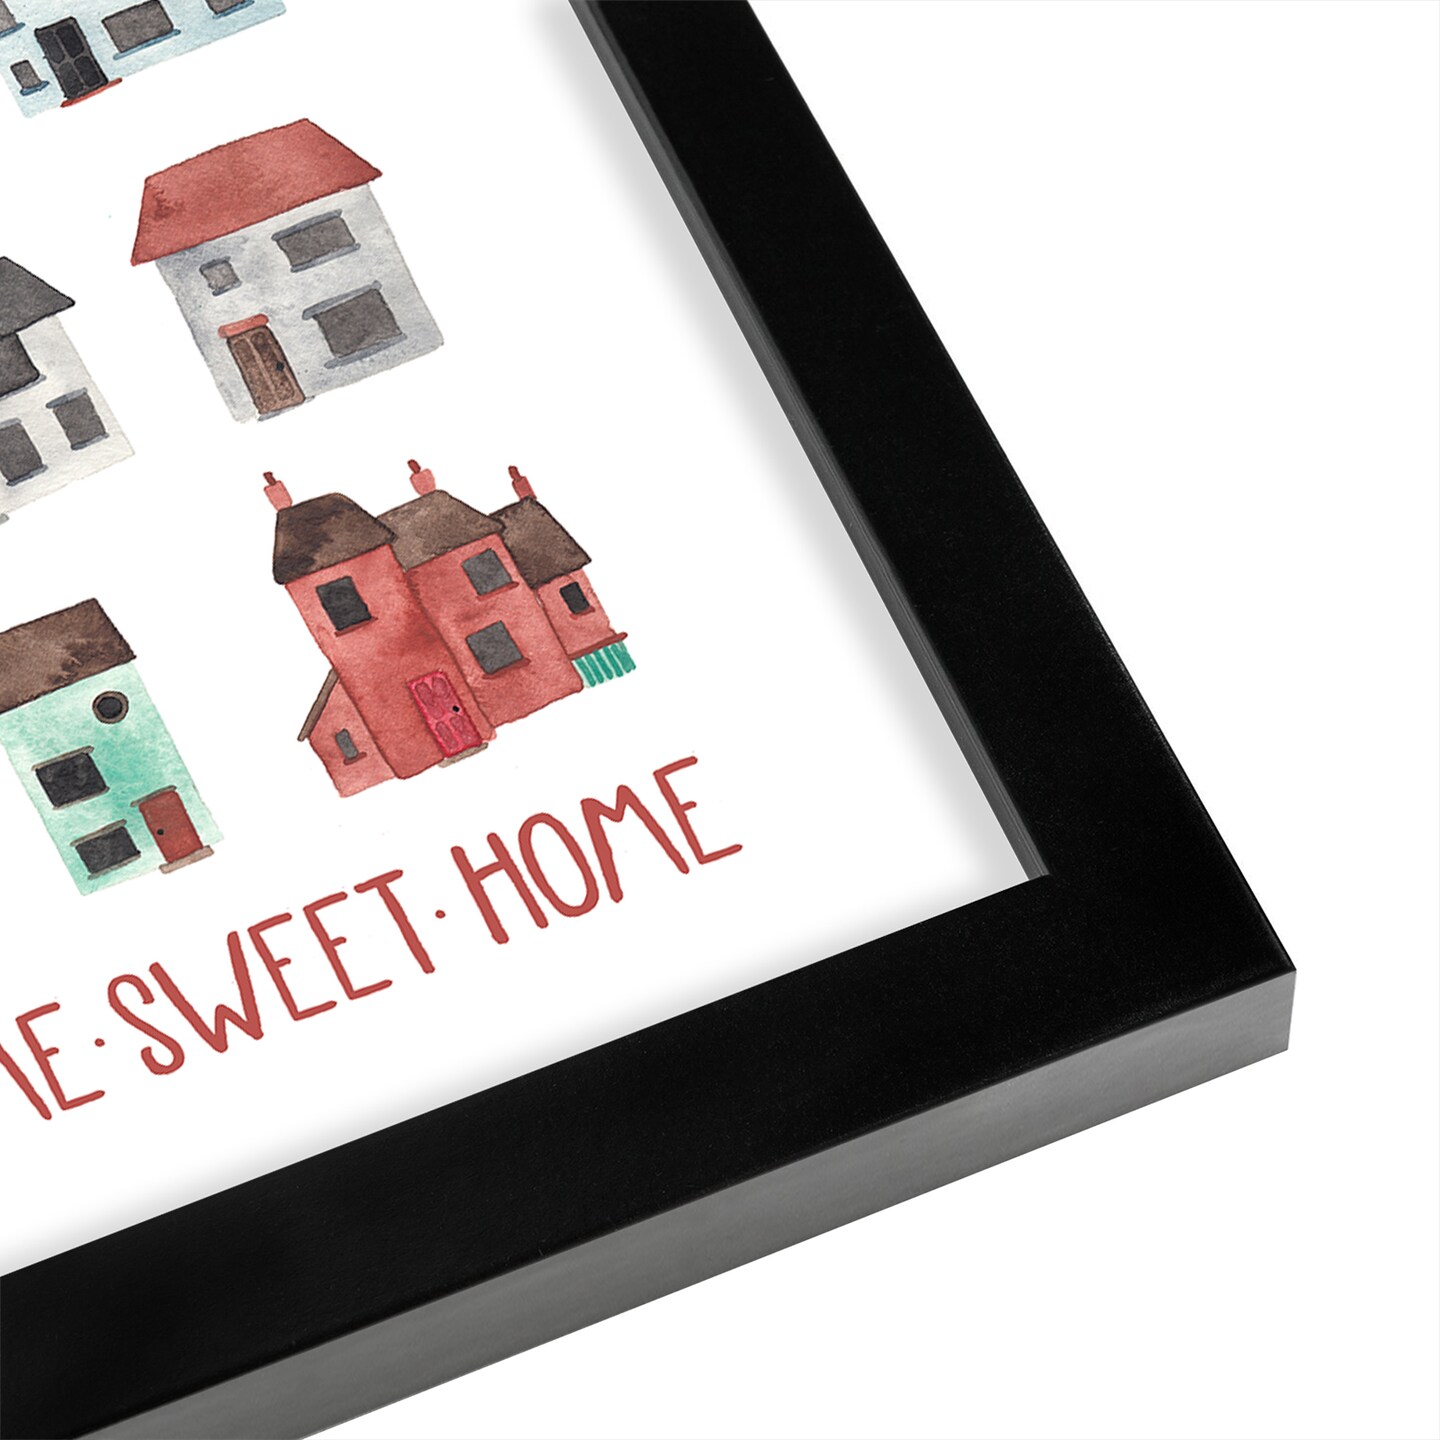 Home Sweet Home by Elena Oneill Frame  - Americanflat